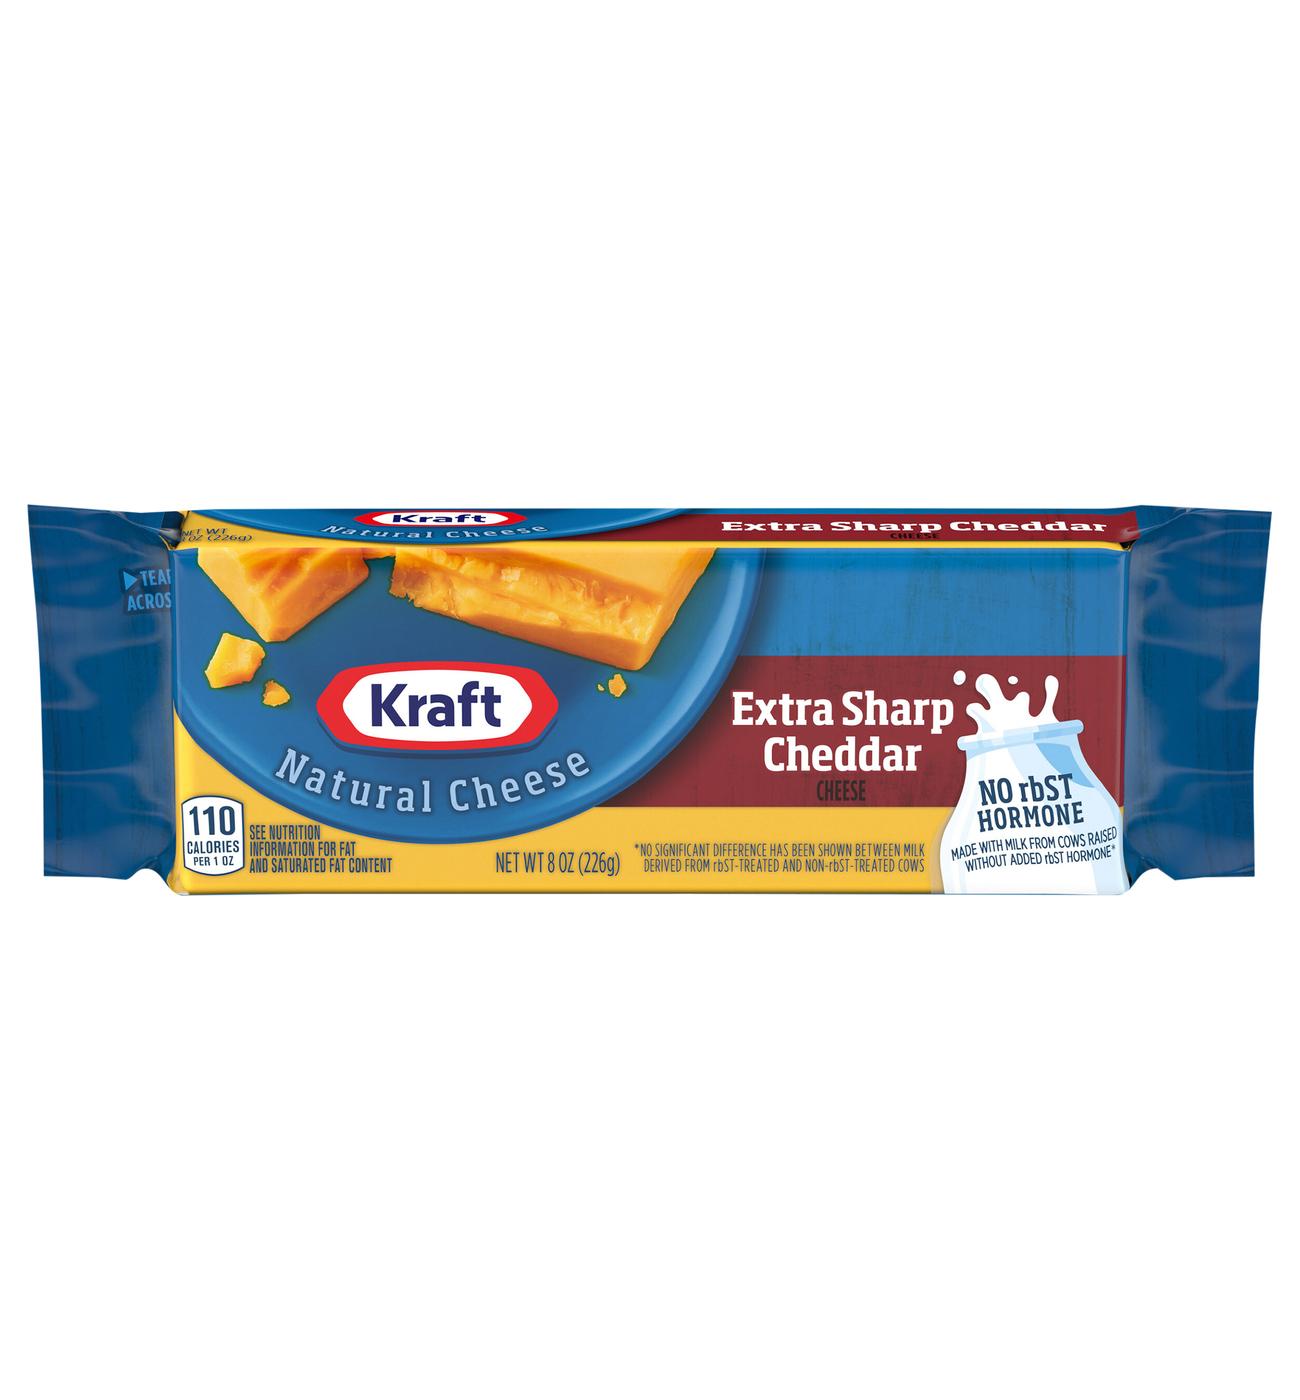 Kraft Extra Sharp Cheddar Cheese; image 1 of 2